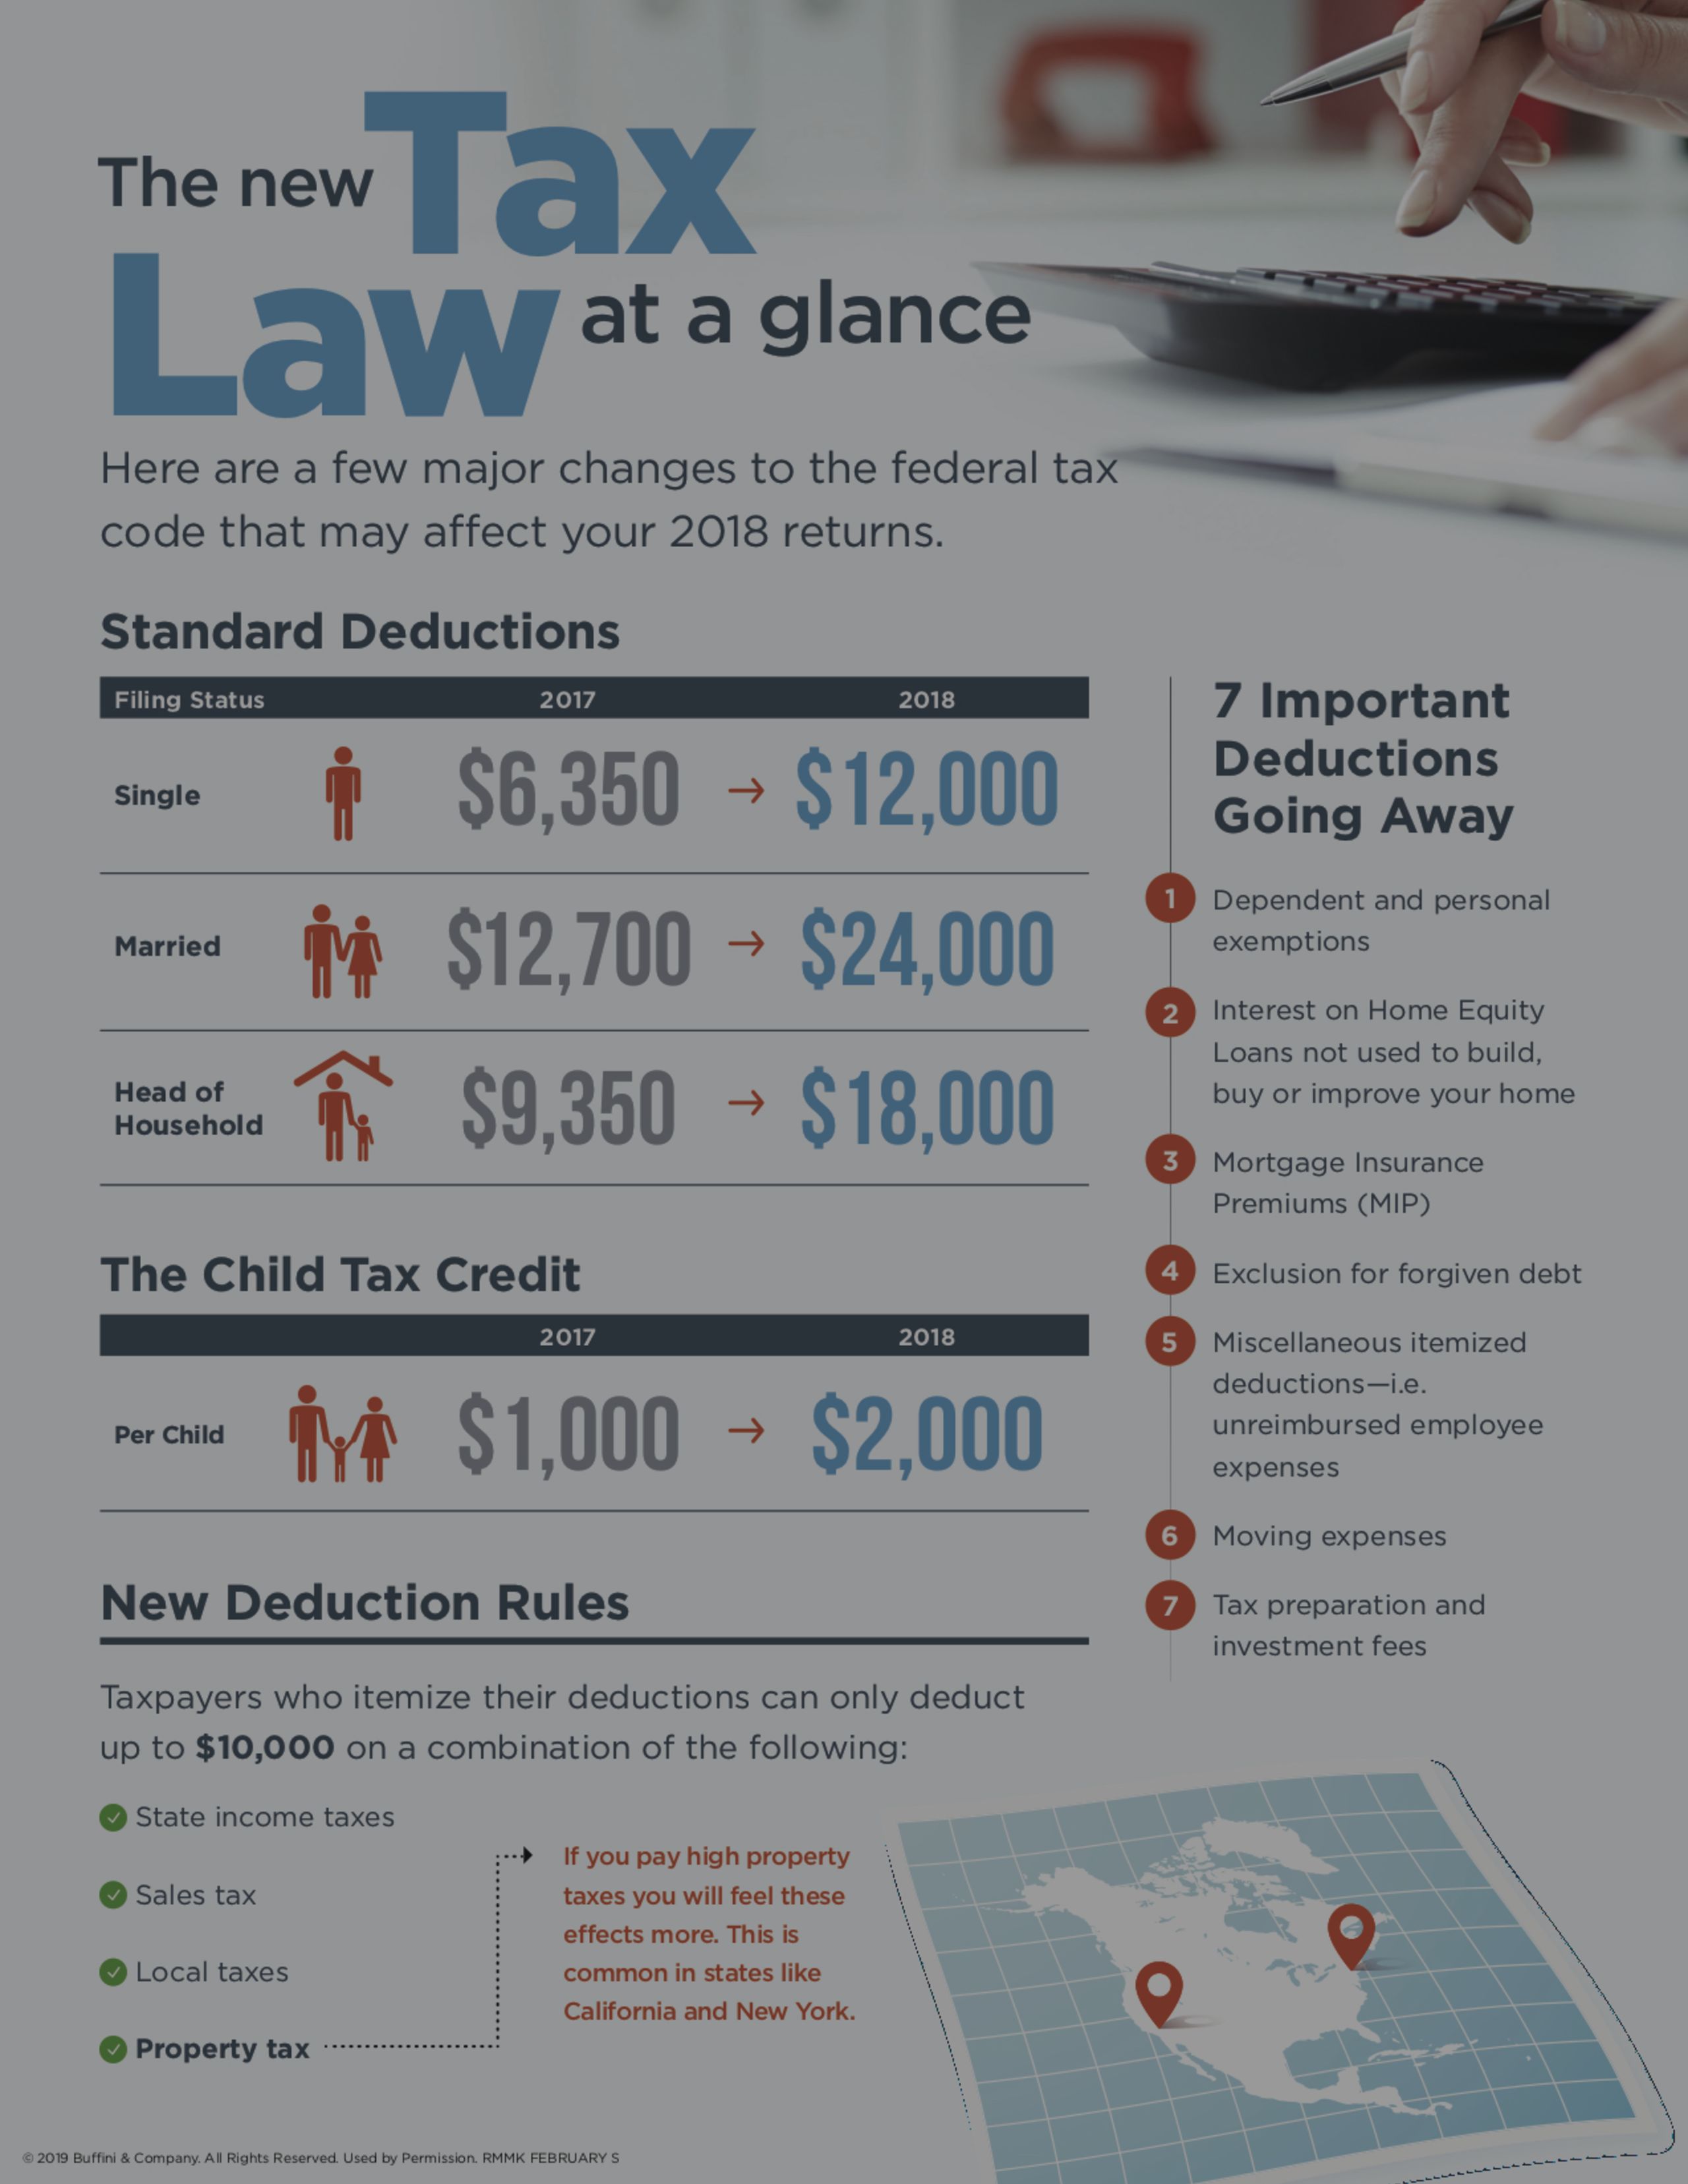 The New Tax Law at a Glance